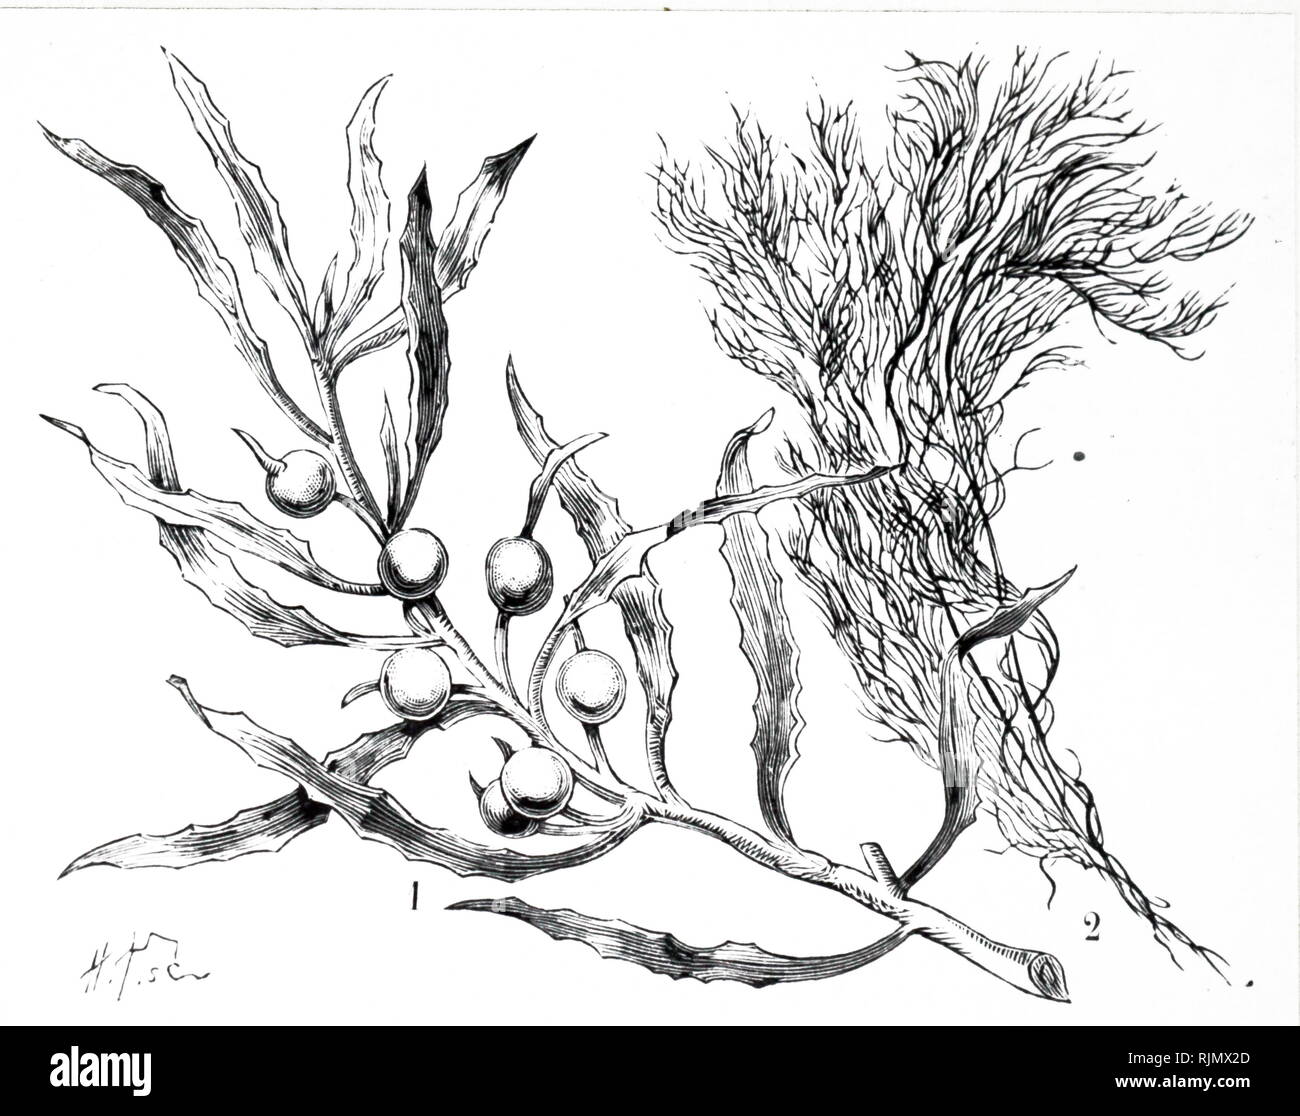 An engraving depicting Seaweed: 1: Sargassum vulgare, the common seaweed of the Sargasso Sea. 2: A species of Polysiphonia. From La Nature, Paris, 1899 Stock Photo